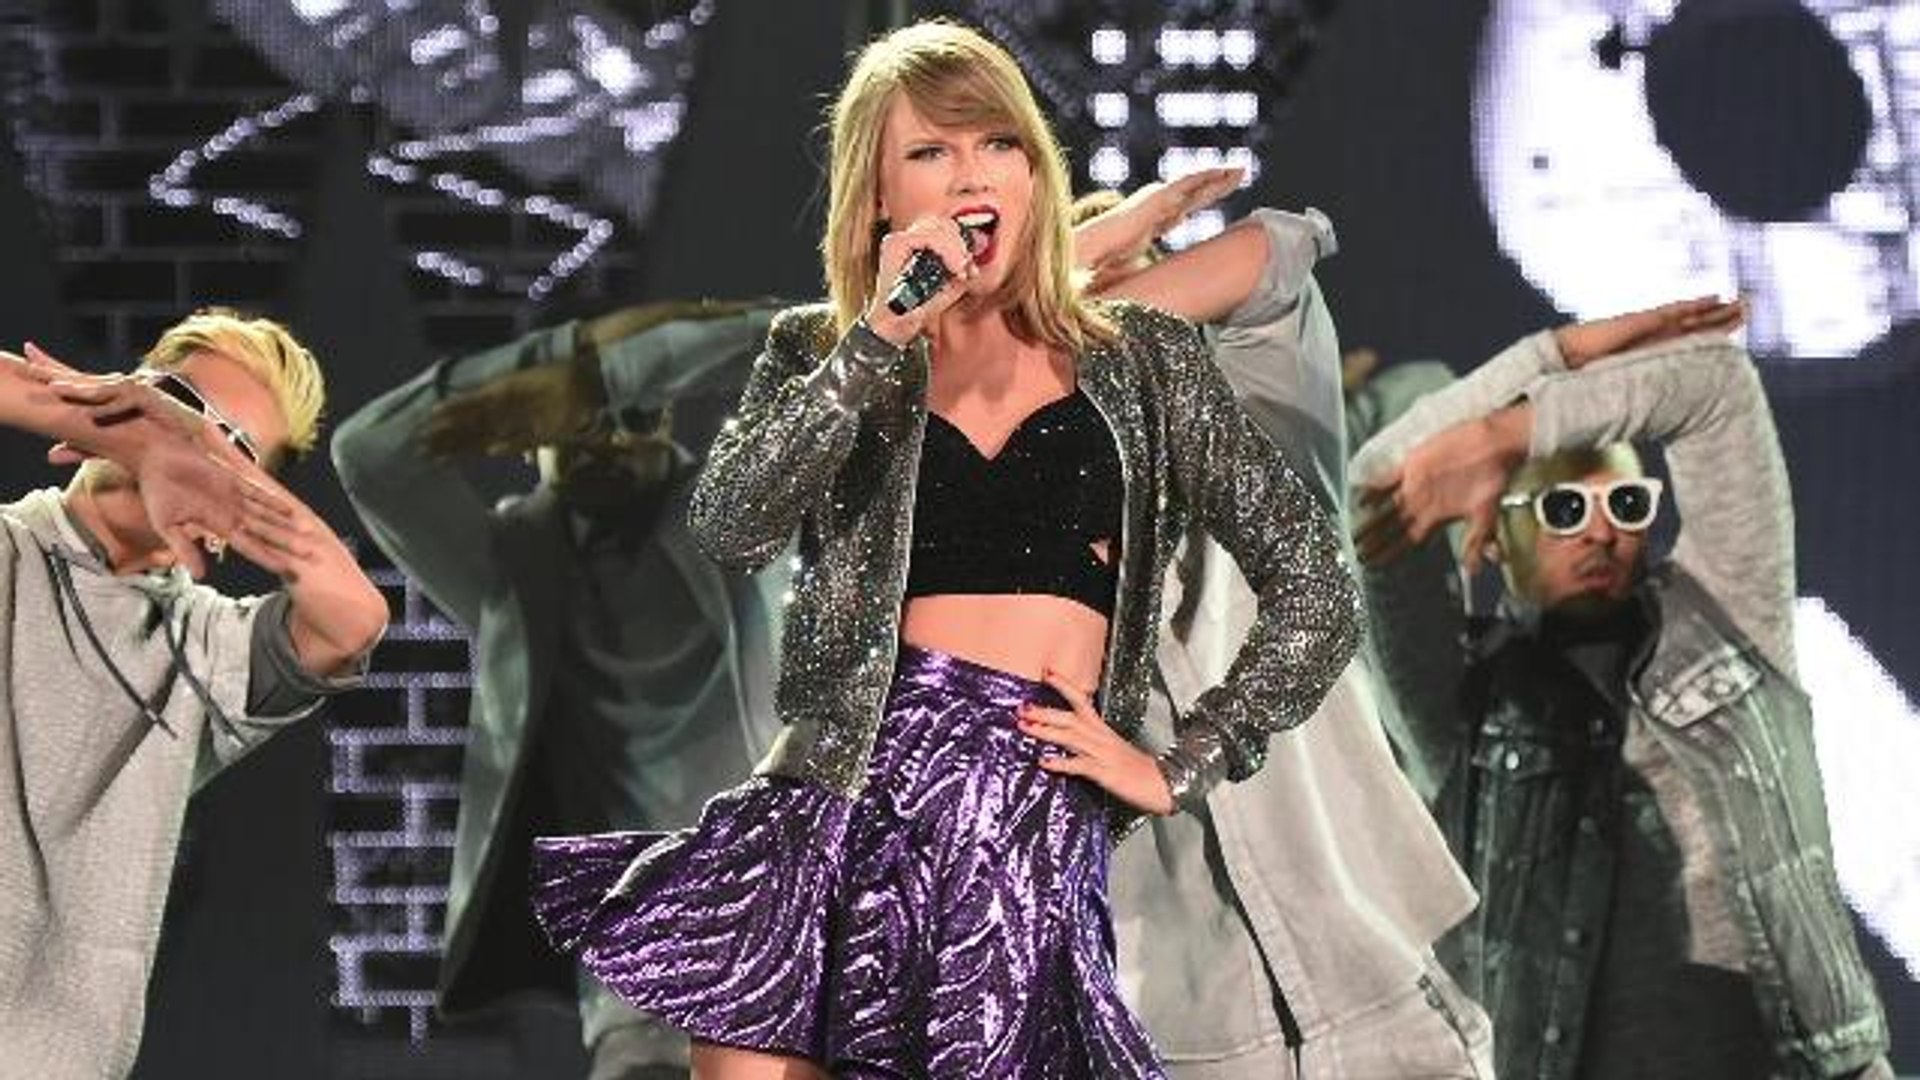 App lets you text in Taylor Swift lyrics